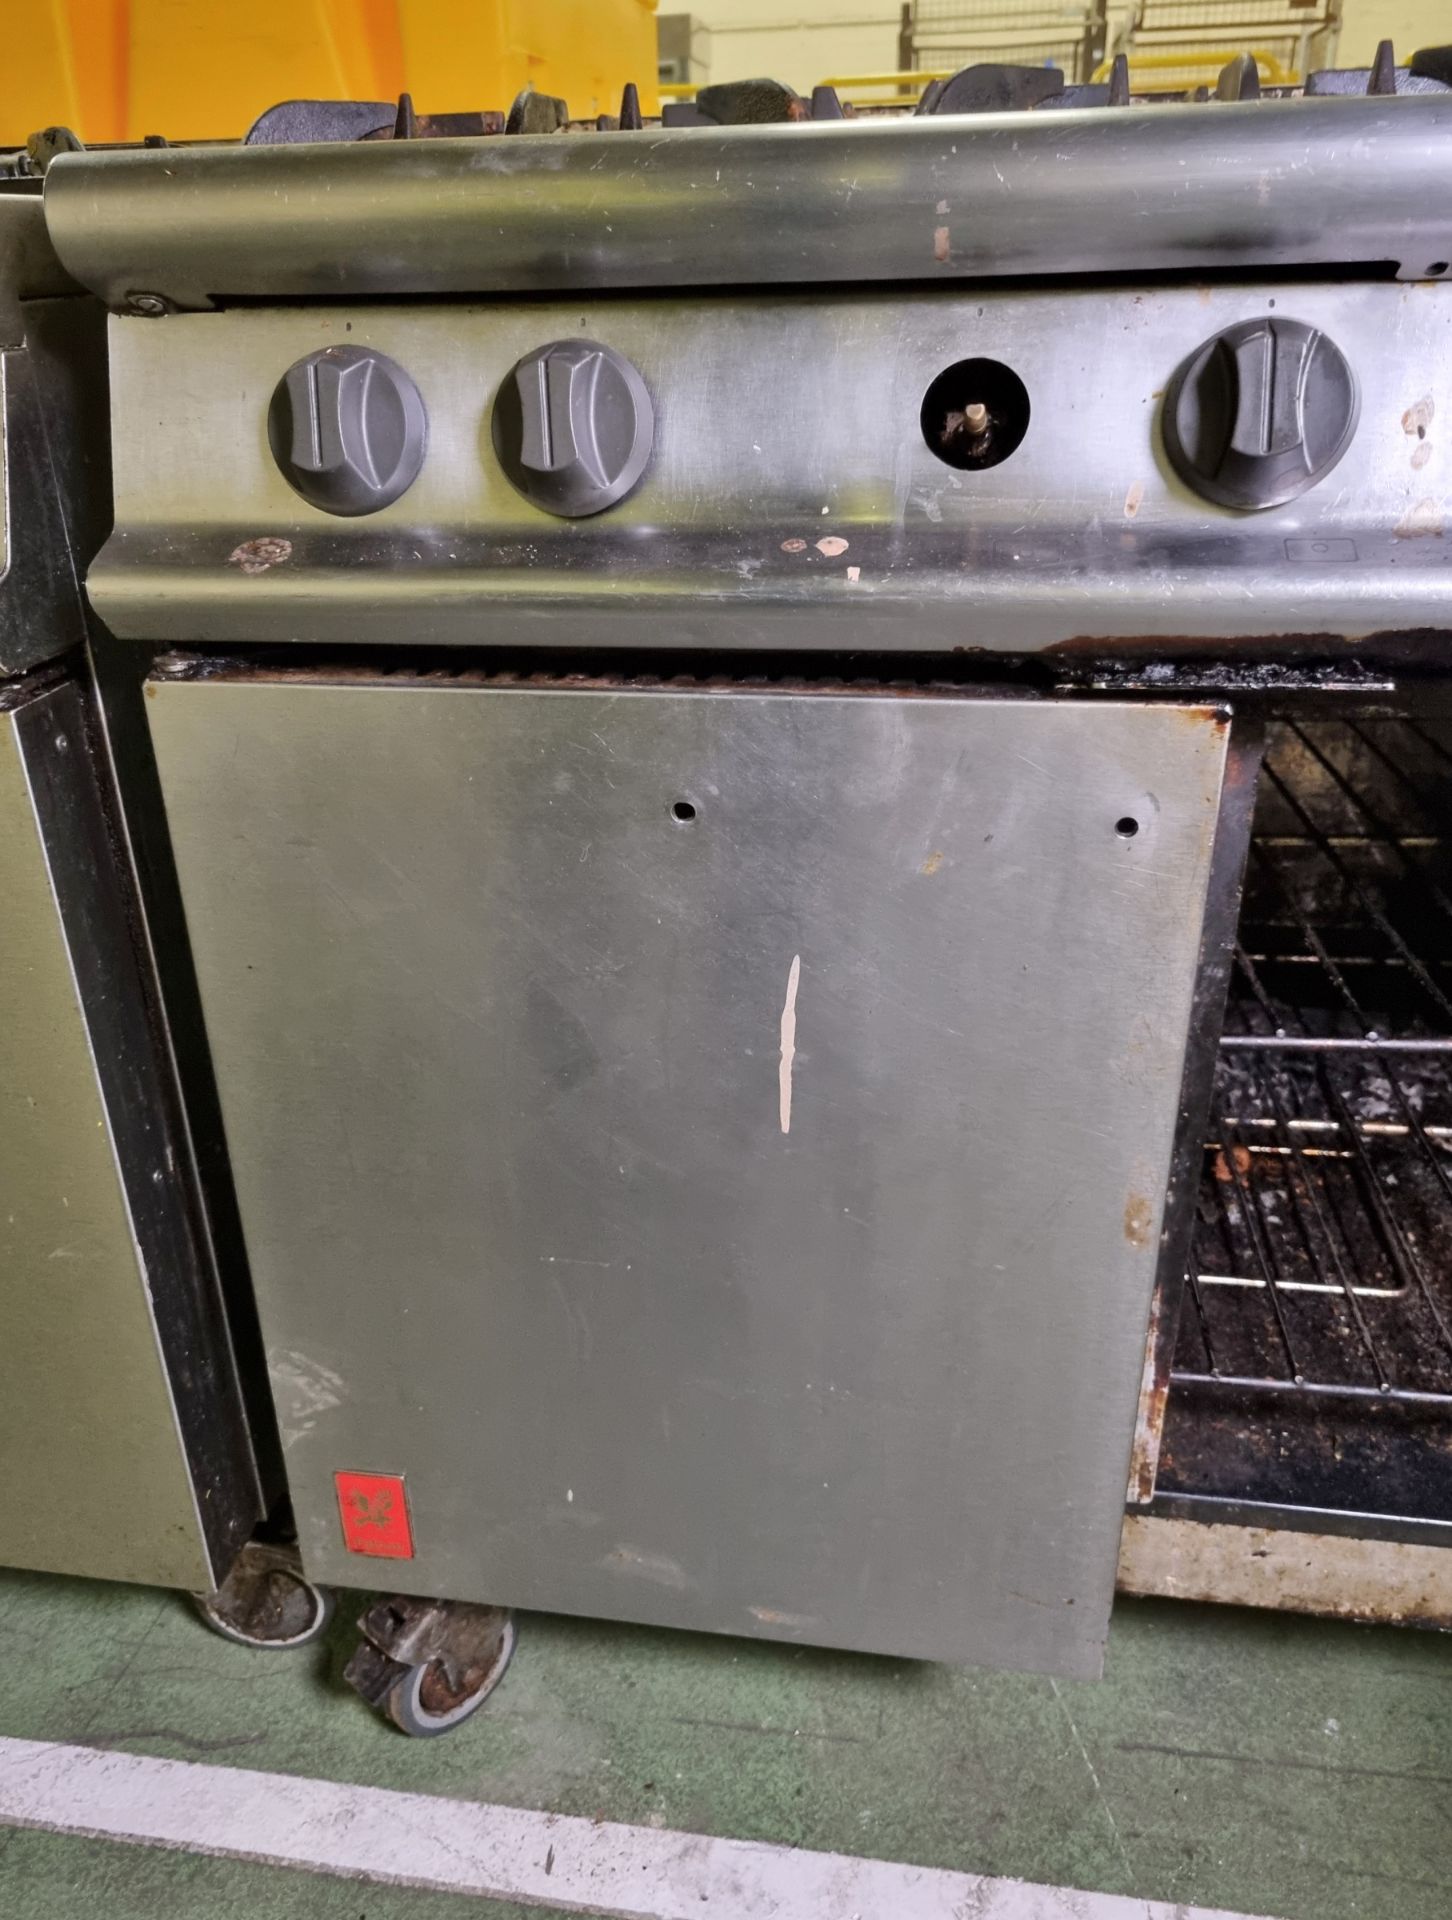 Falcon G3101 6-burner gas oven range - W 900 x D 780 x H 900mm - MISSING CONTROL KNOB AND HANDLE - Image 4 of 4